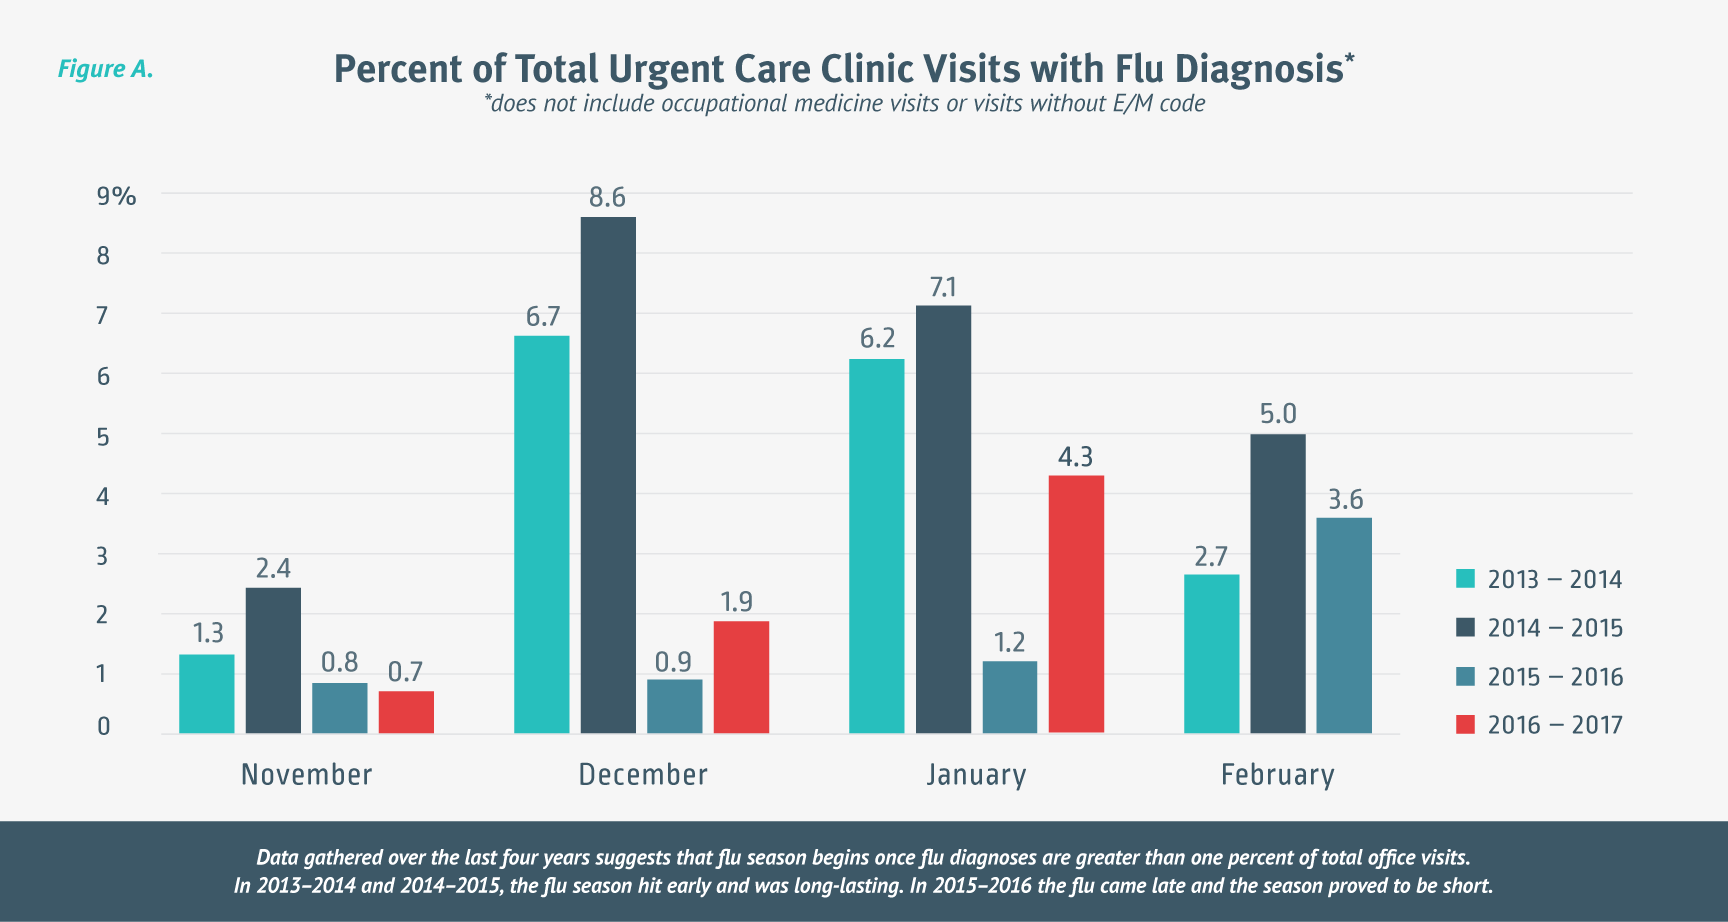 Percent of Total Urgent Care Clinic Visits with Flu Diagnosis - Chart